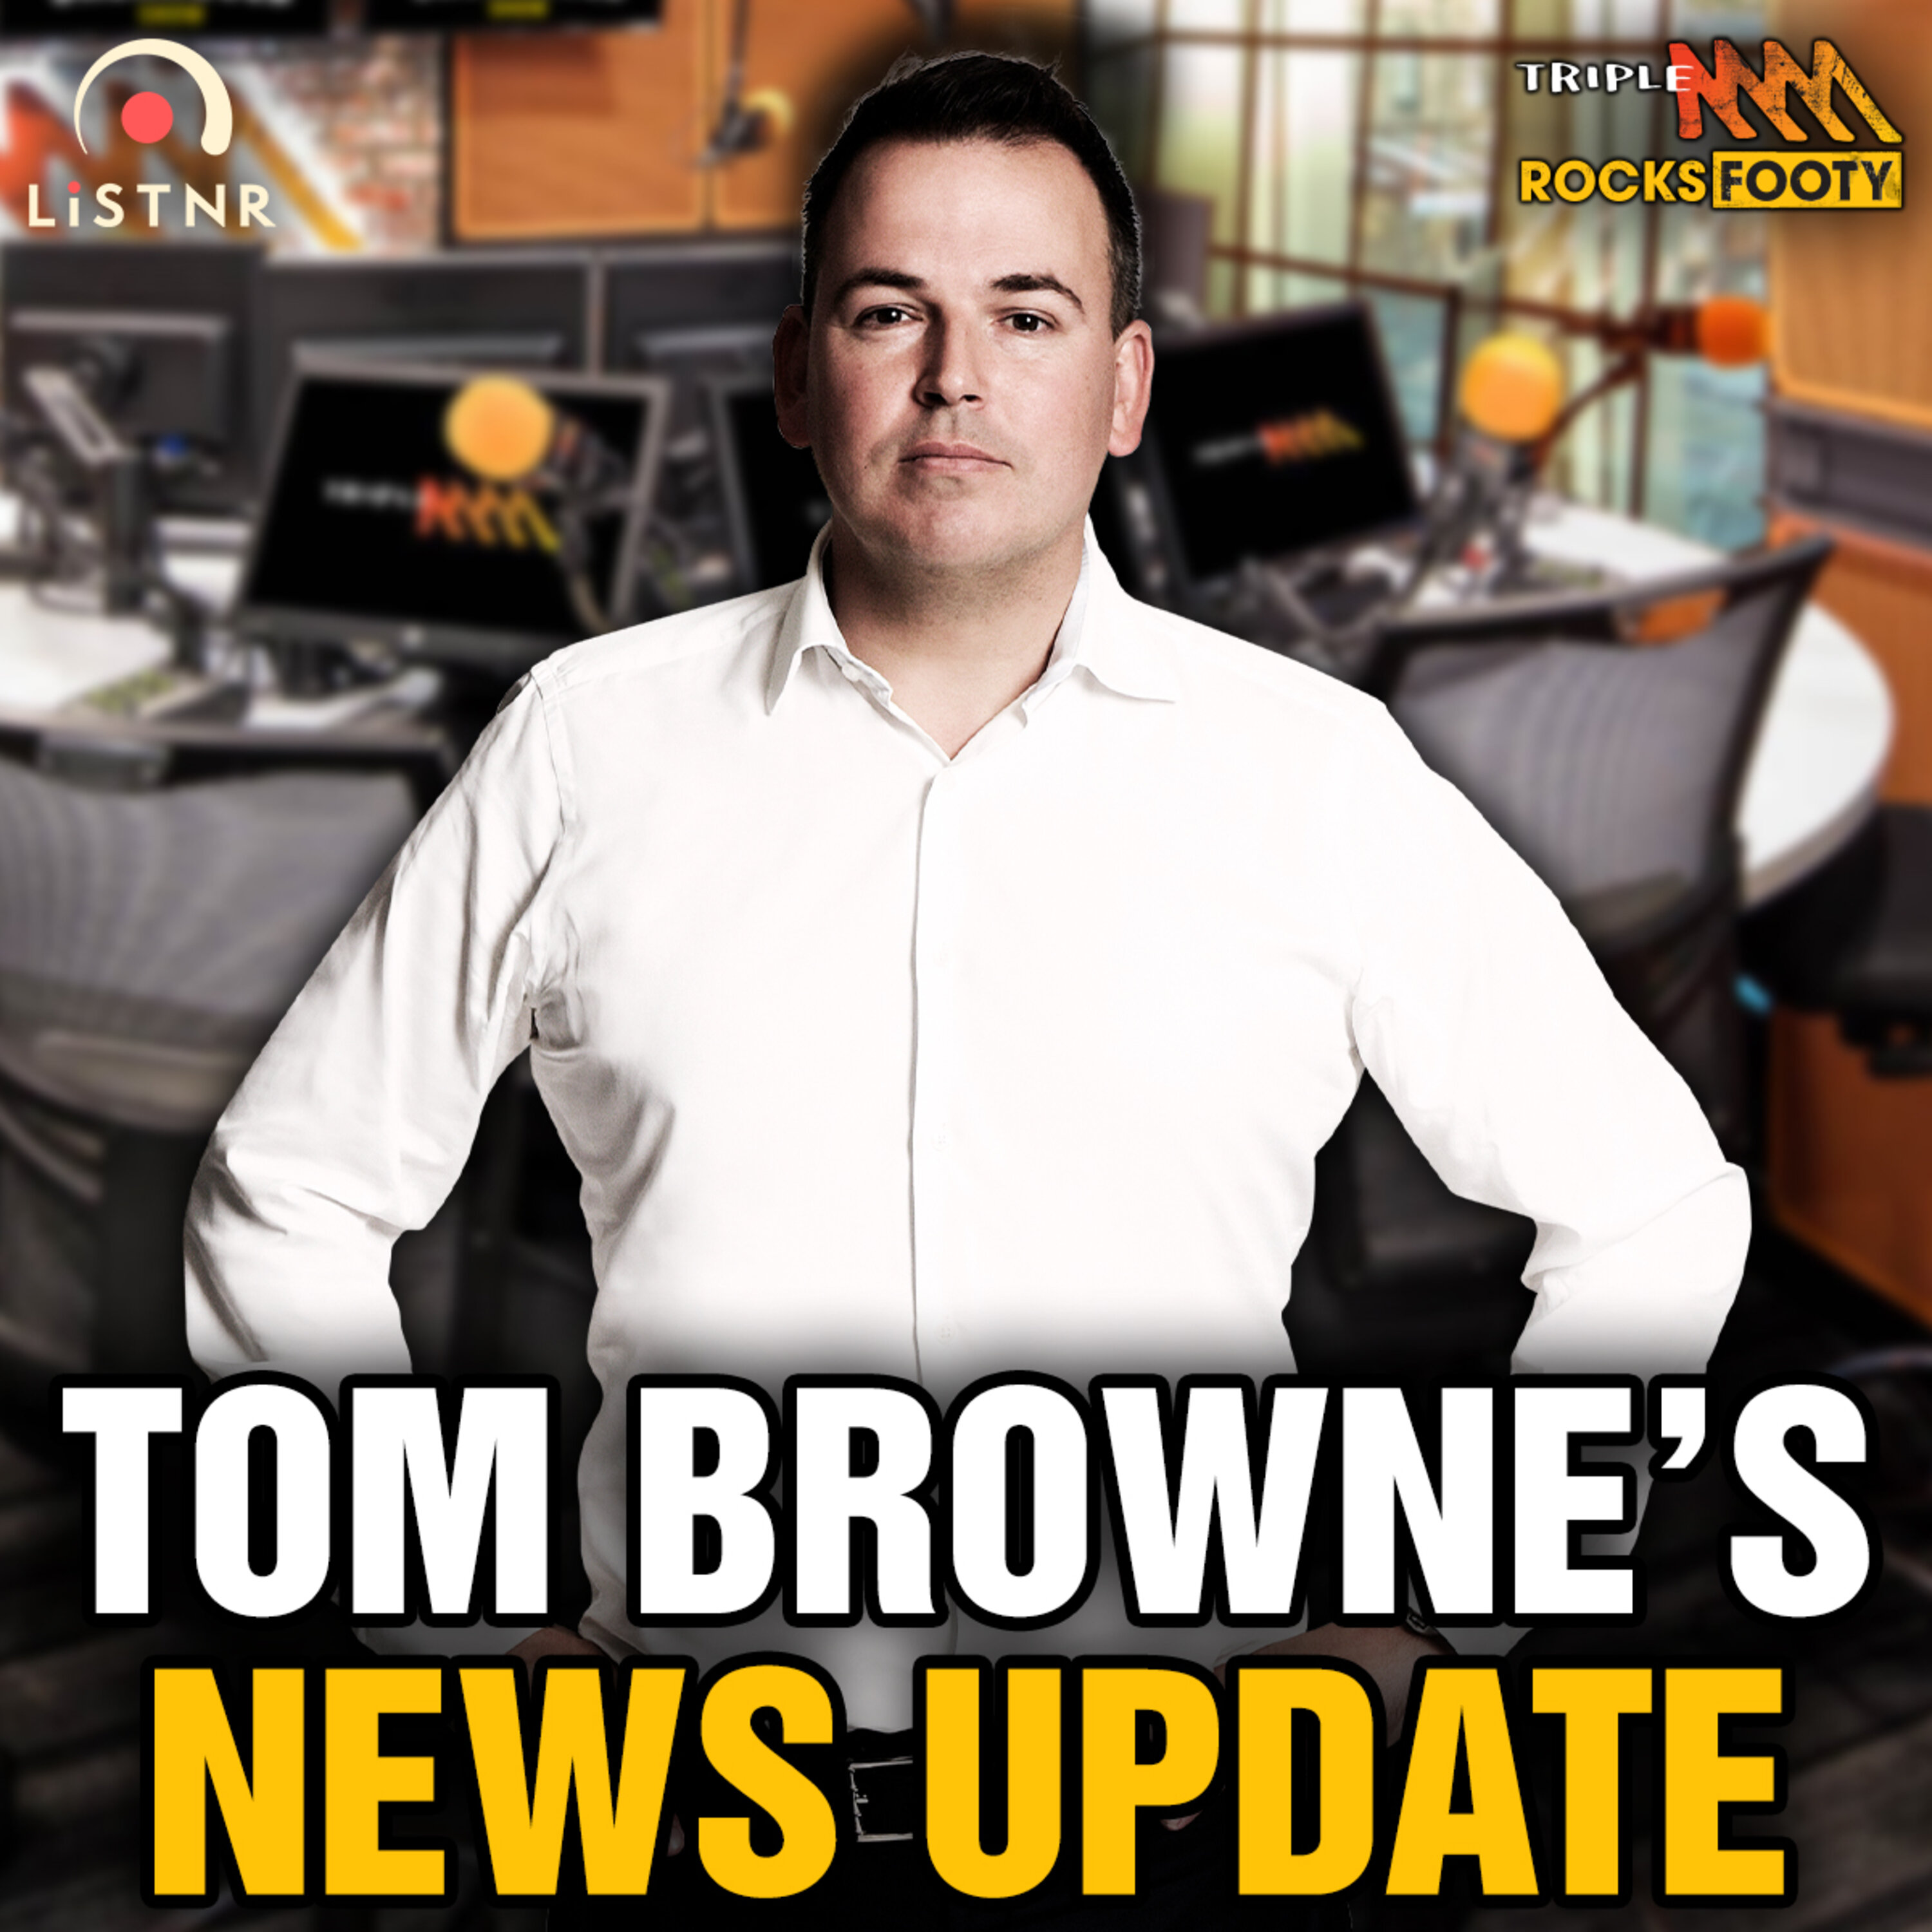 Tom Browne's News | Hawthorn allegations fallout, Hird Bombers coaching hopes “fading”, trade update